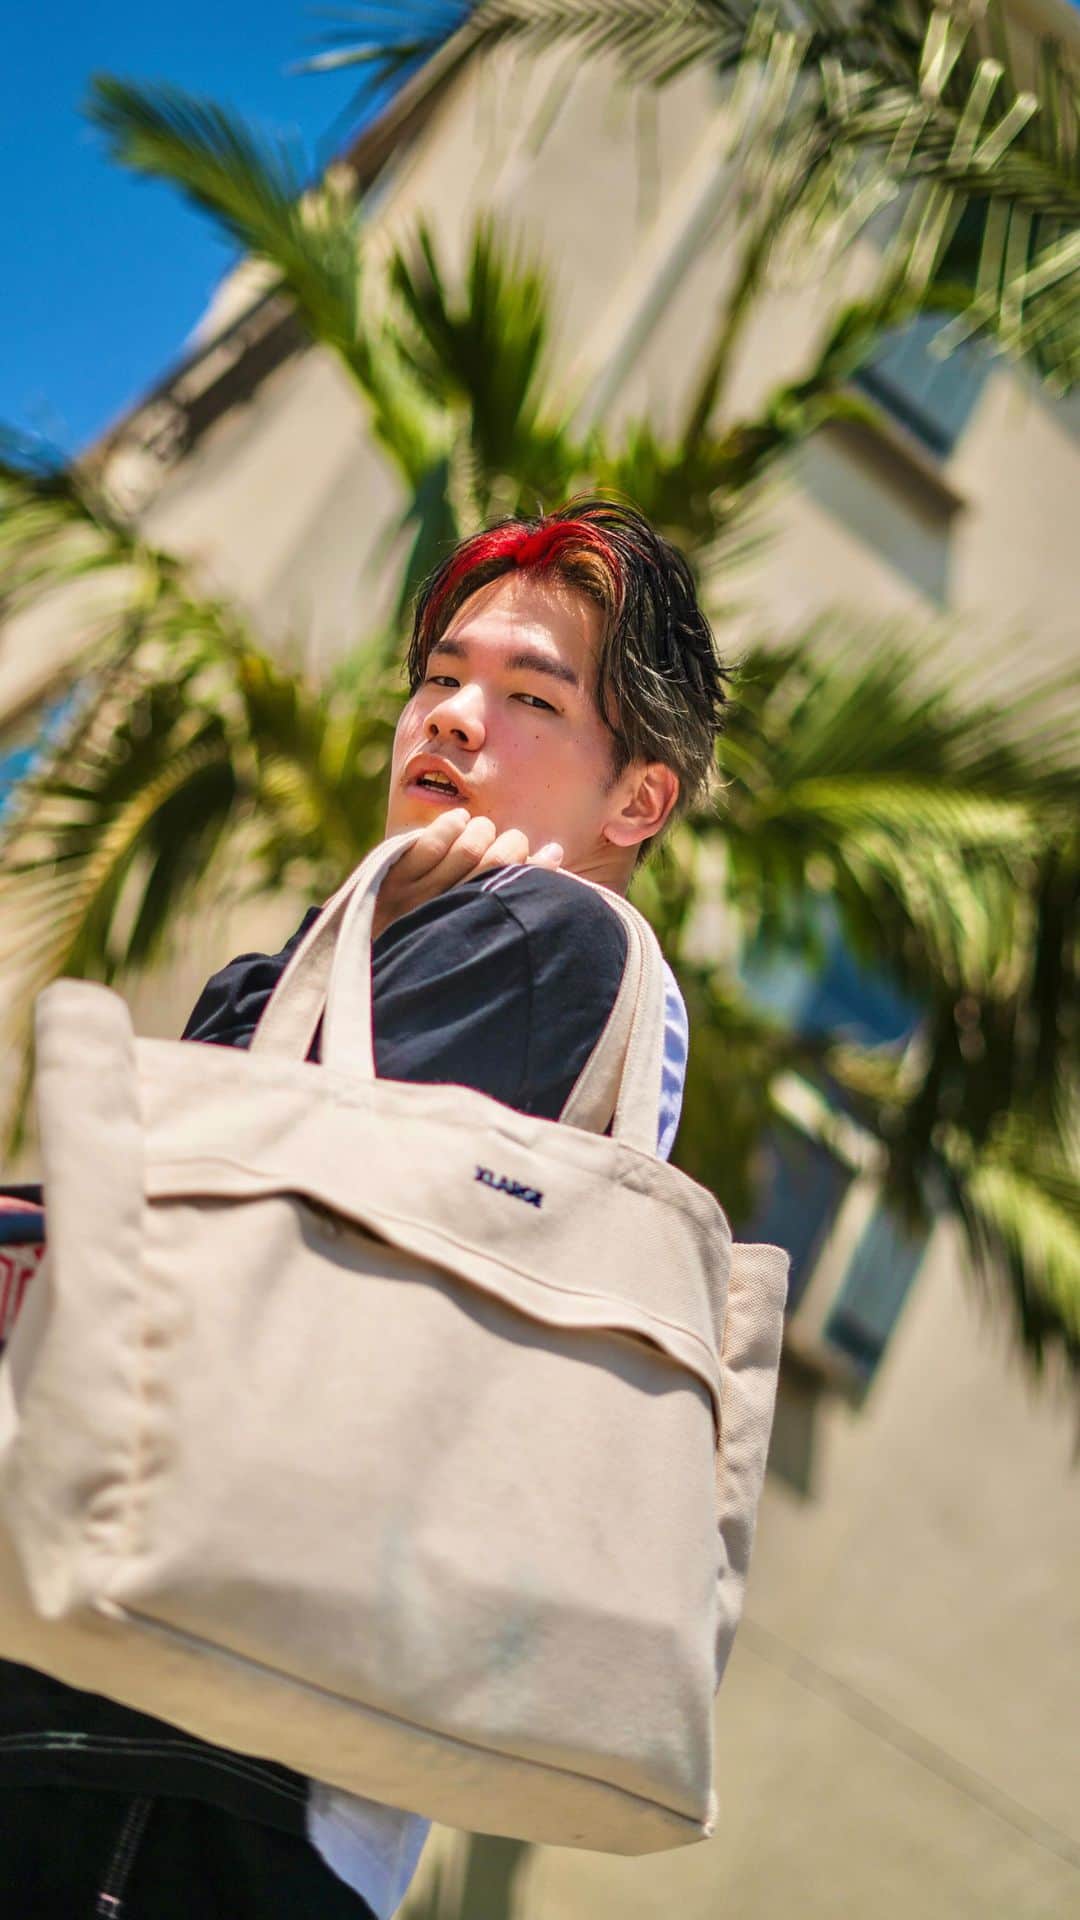 XLARGE®︎ SNAP XLARGE®︎ official SNAP instagramのインスタグラム：「《XLARGE ITEMS》in Los Angeles🏡 edited by @m__drop   @xlargejp  @xlarge_snap   #xlarge #xlargejp #xlarge_snap #freestylefootball #fashion #style #losangeles #dance #reel」